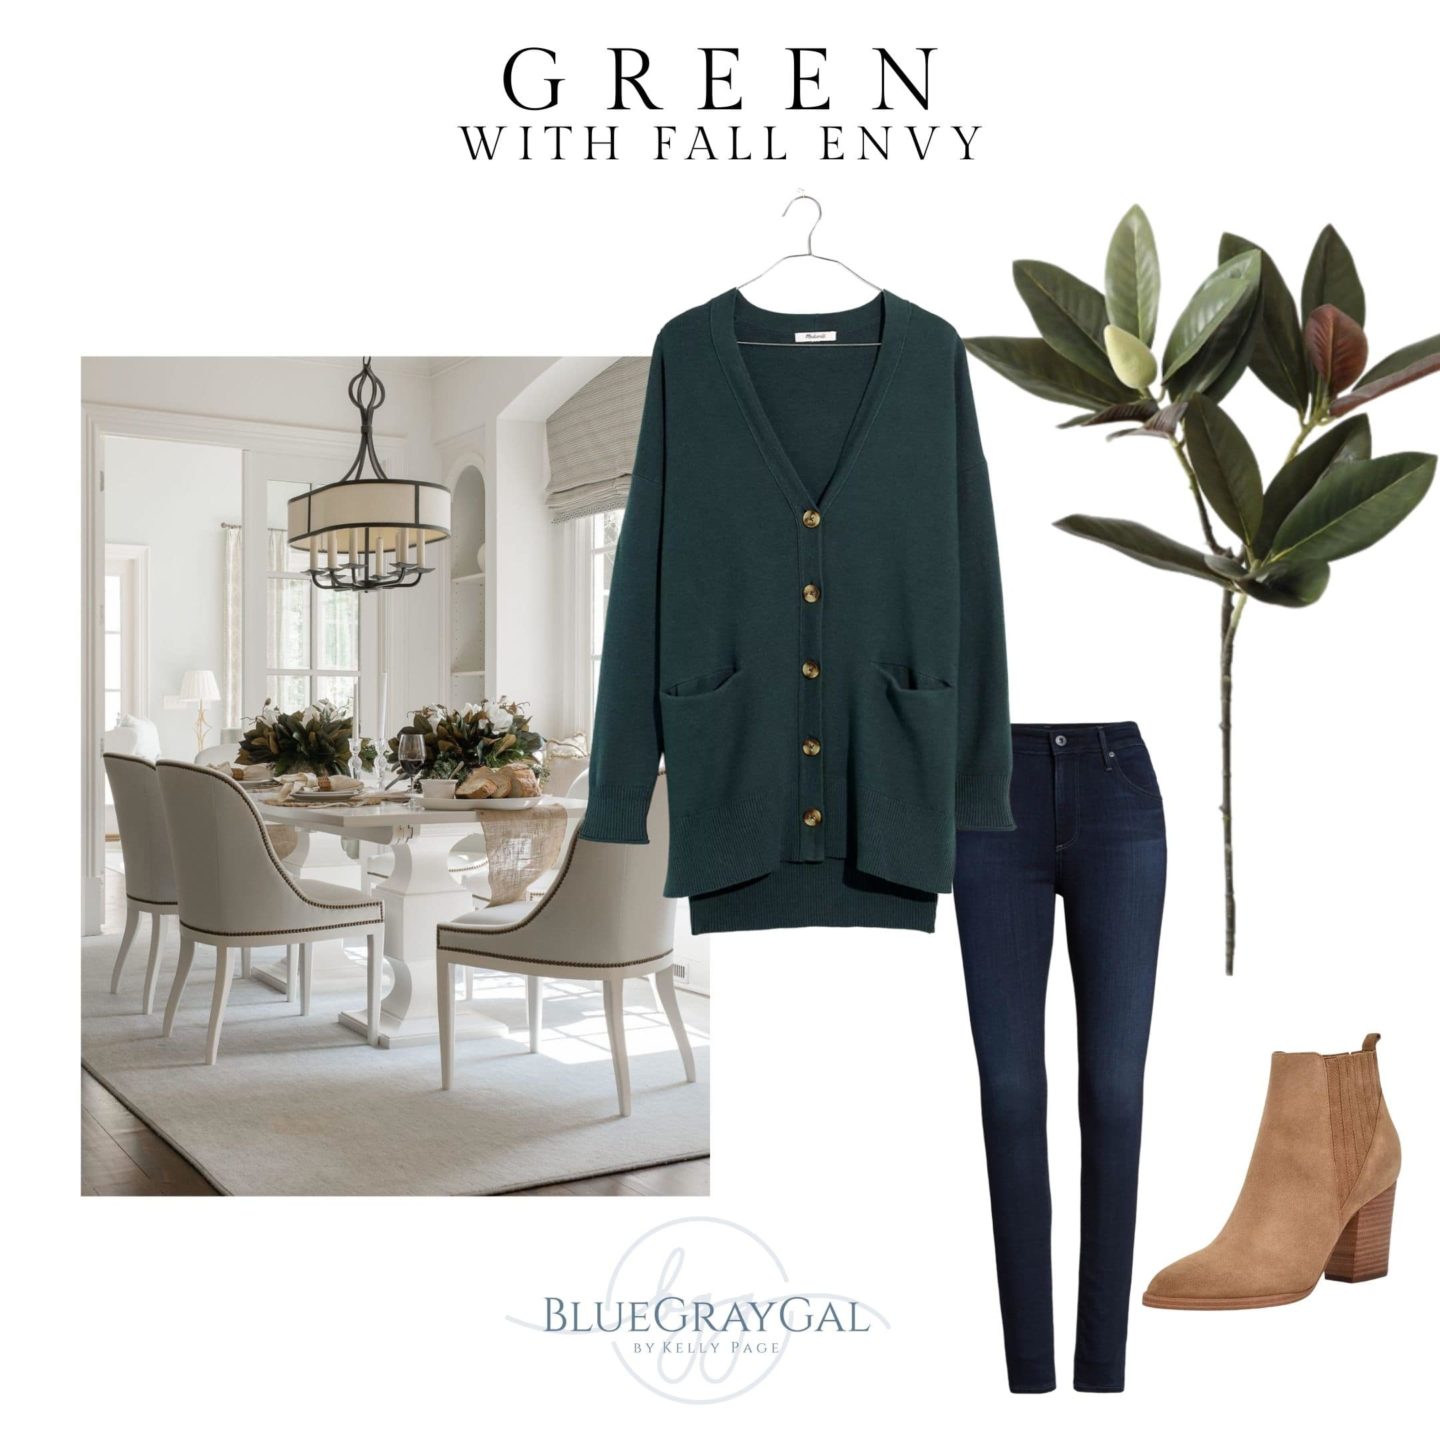 Casual cute fall outfits in green and brown for the fall.